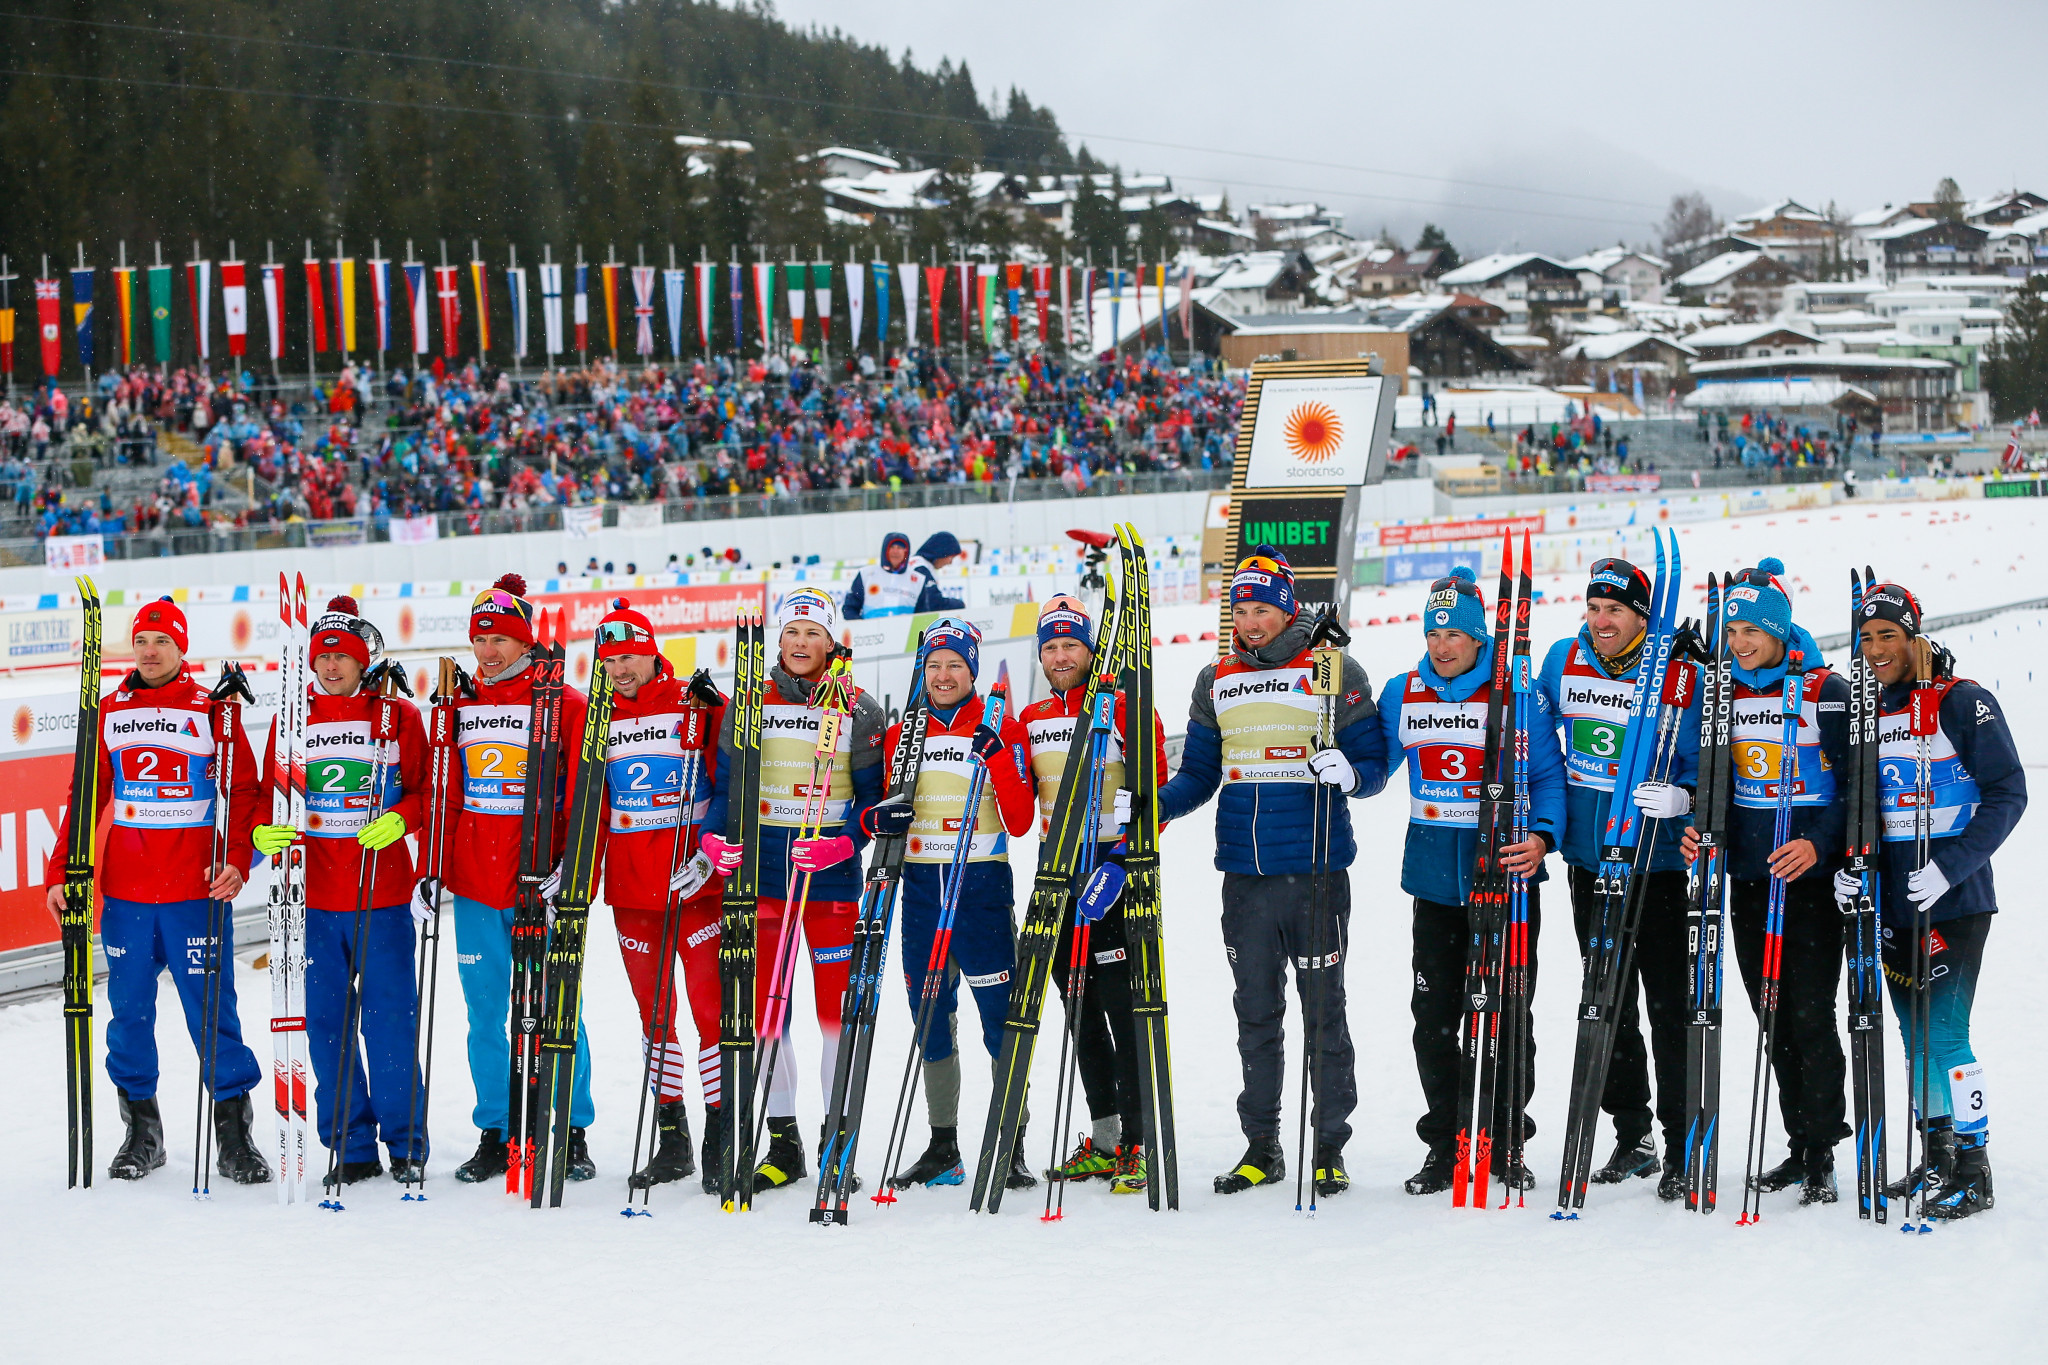 Norway secured their 10th straight cross-country 4x10km men's relay title ©Getty Images